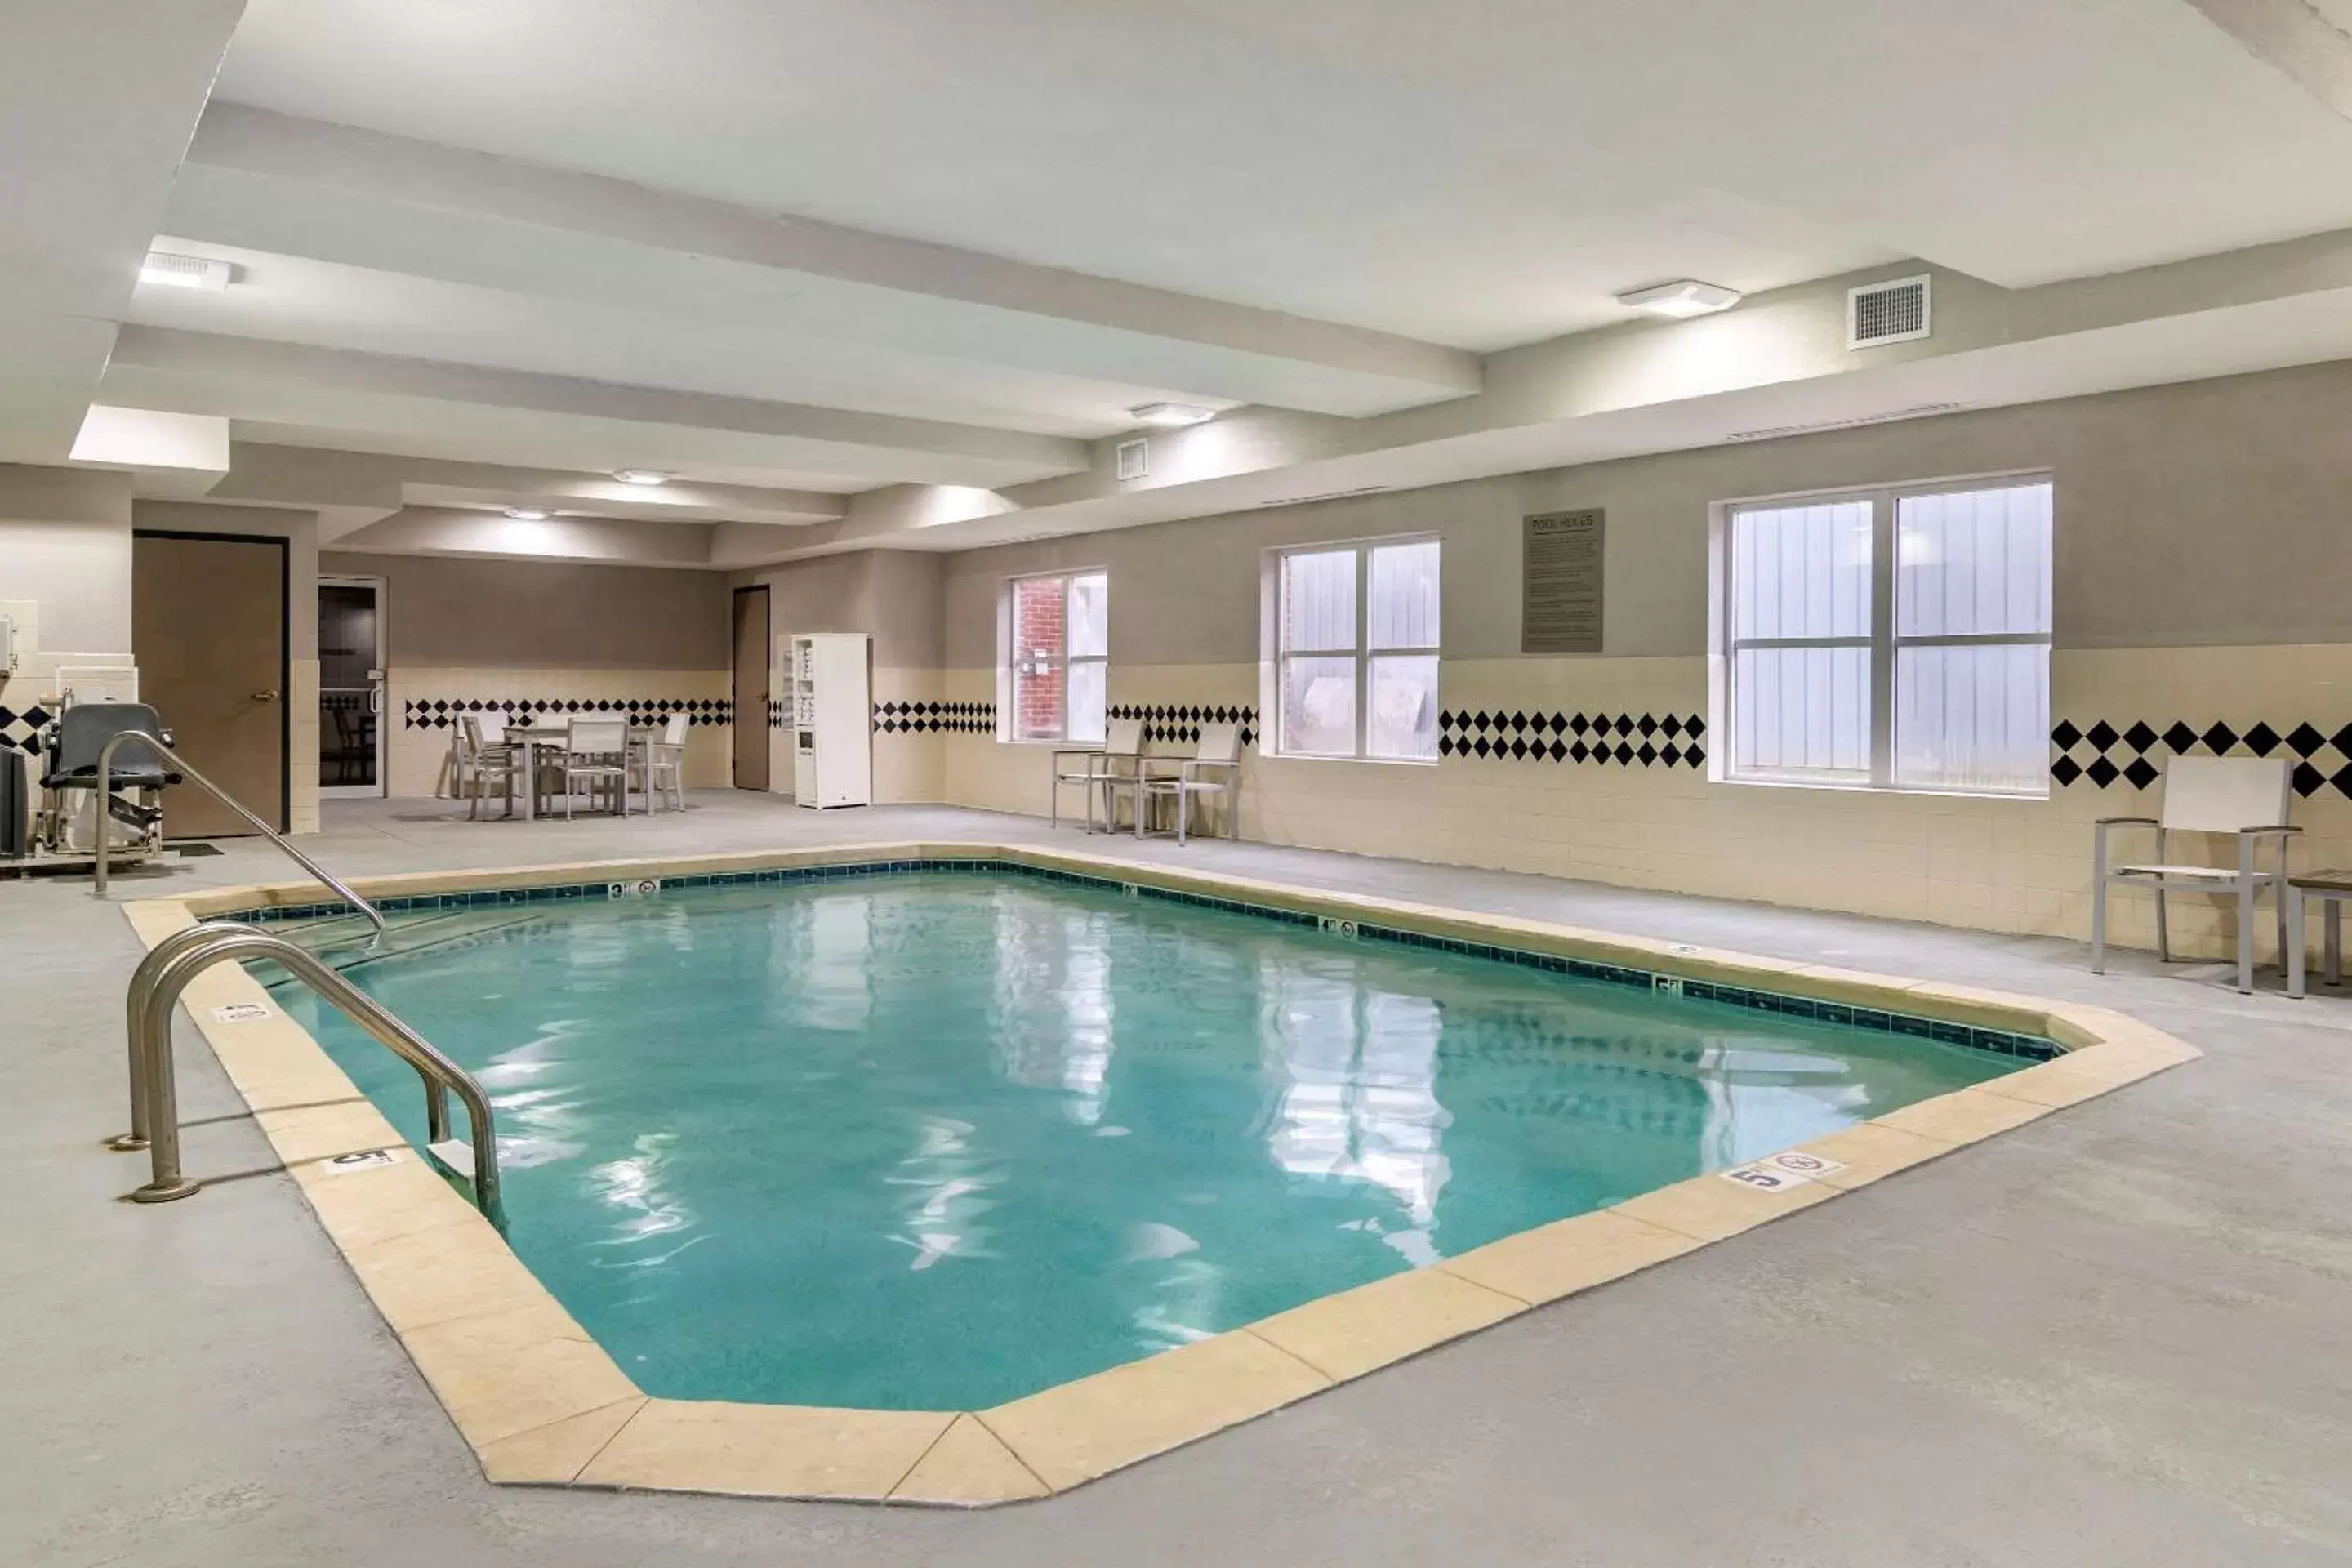 On site, Swimming Pool in Comfort Inn & Suites Calhoun South